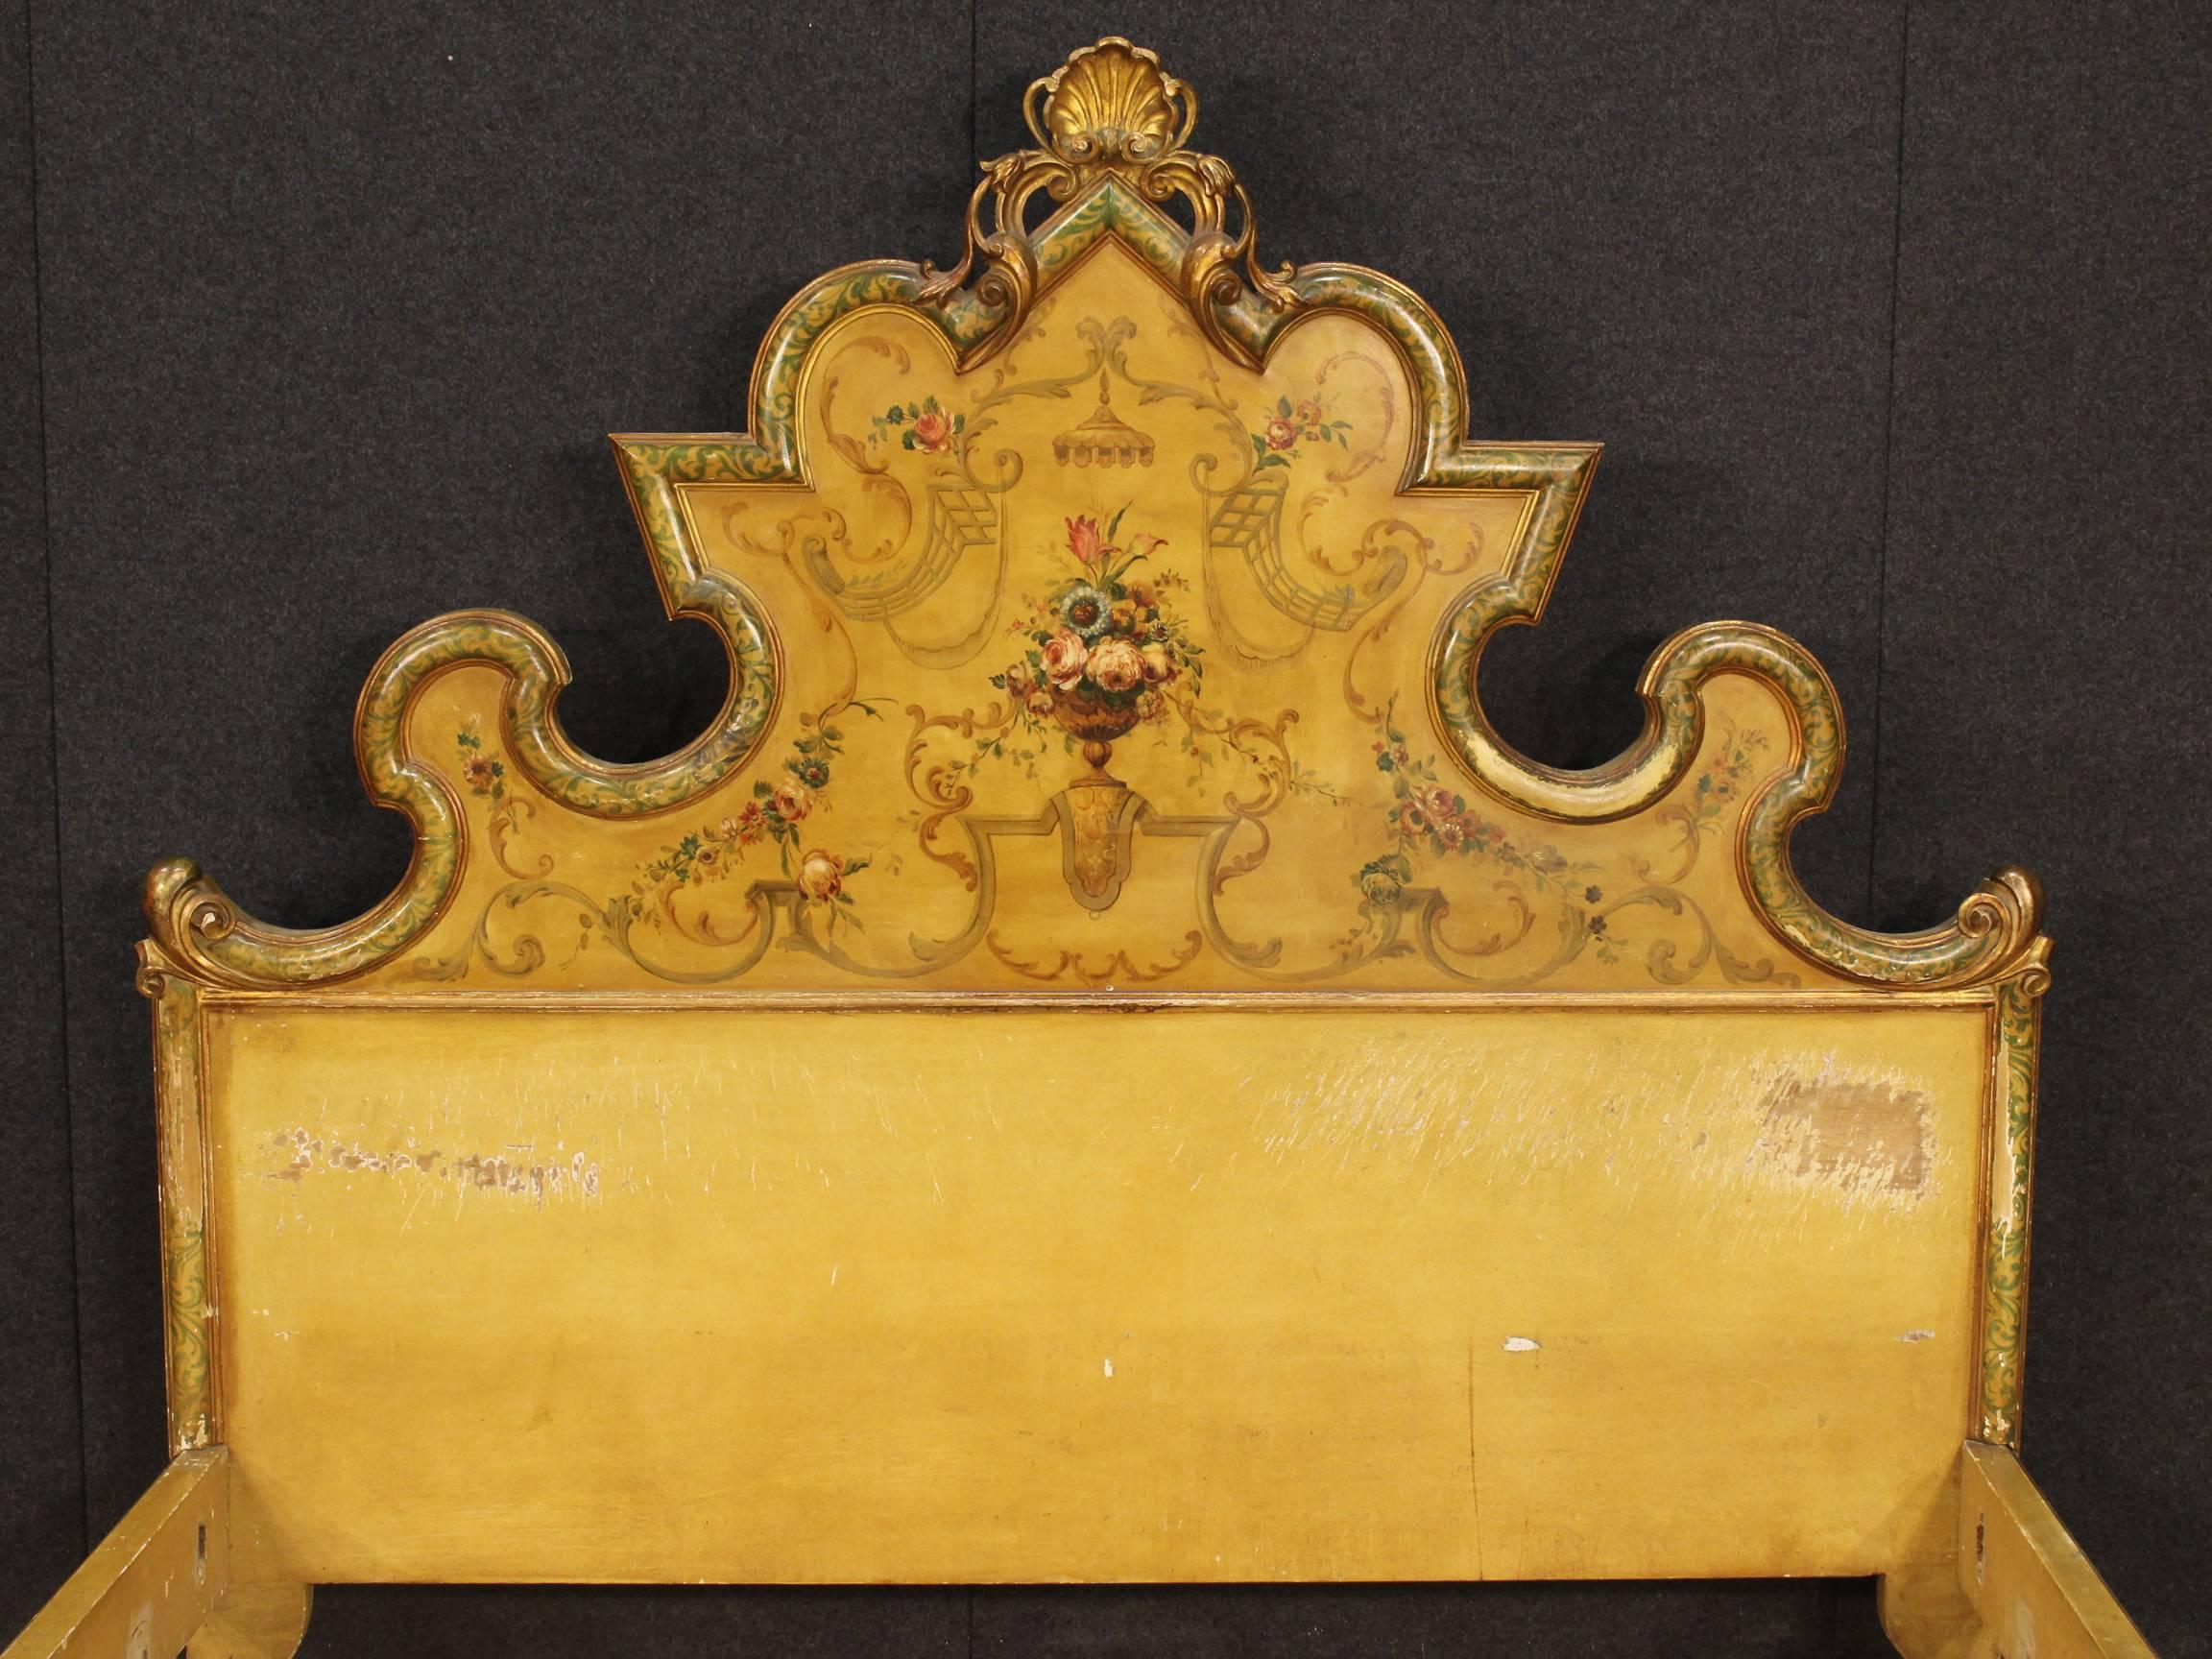 Spectacular Venetian double bed of the 20th century. Furniture made by ornately carved, lacquered, gilded and painted with floral decorations wood of great taste and enjoyment. Bed of exceptional decor rich in details of very beautiful decoration.